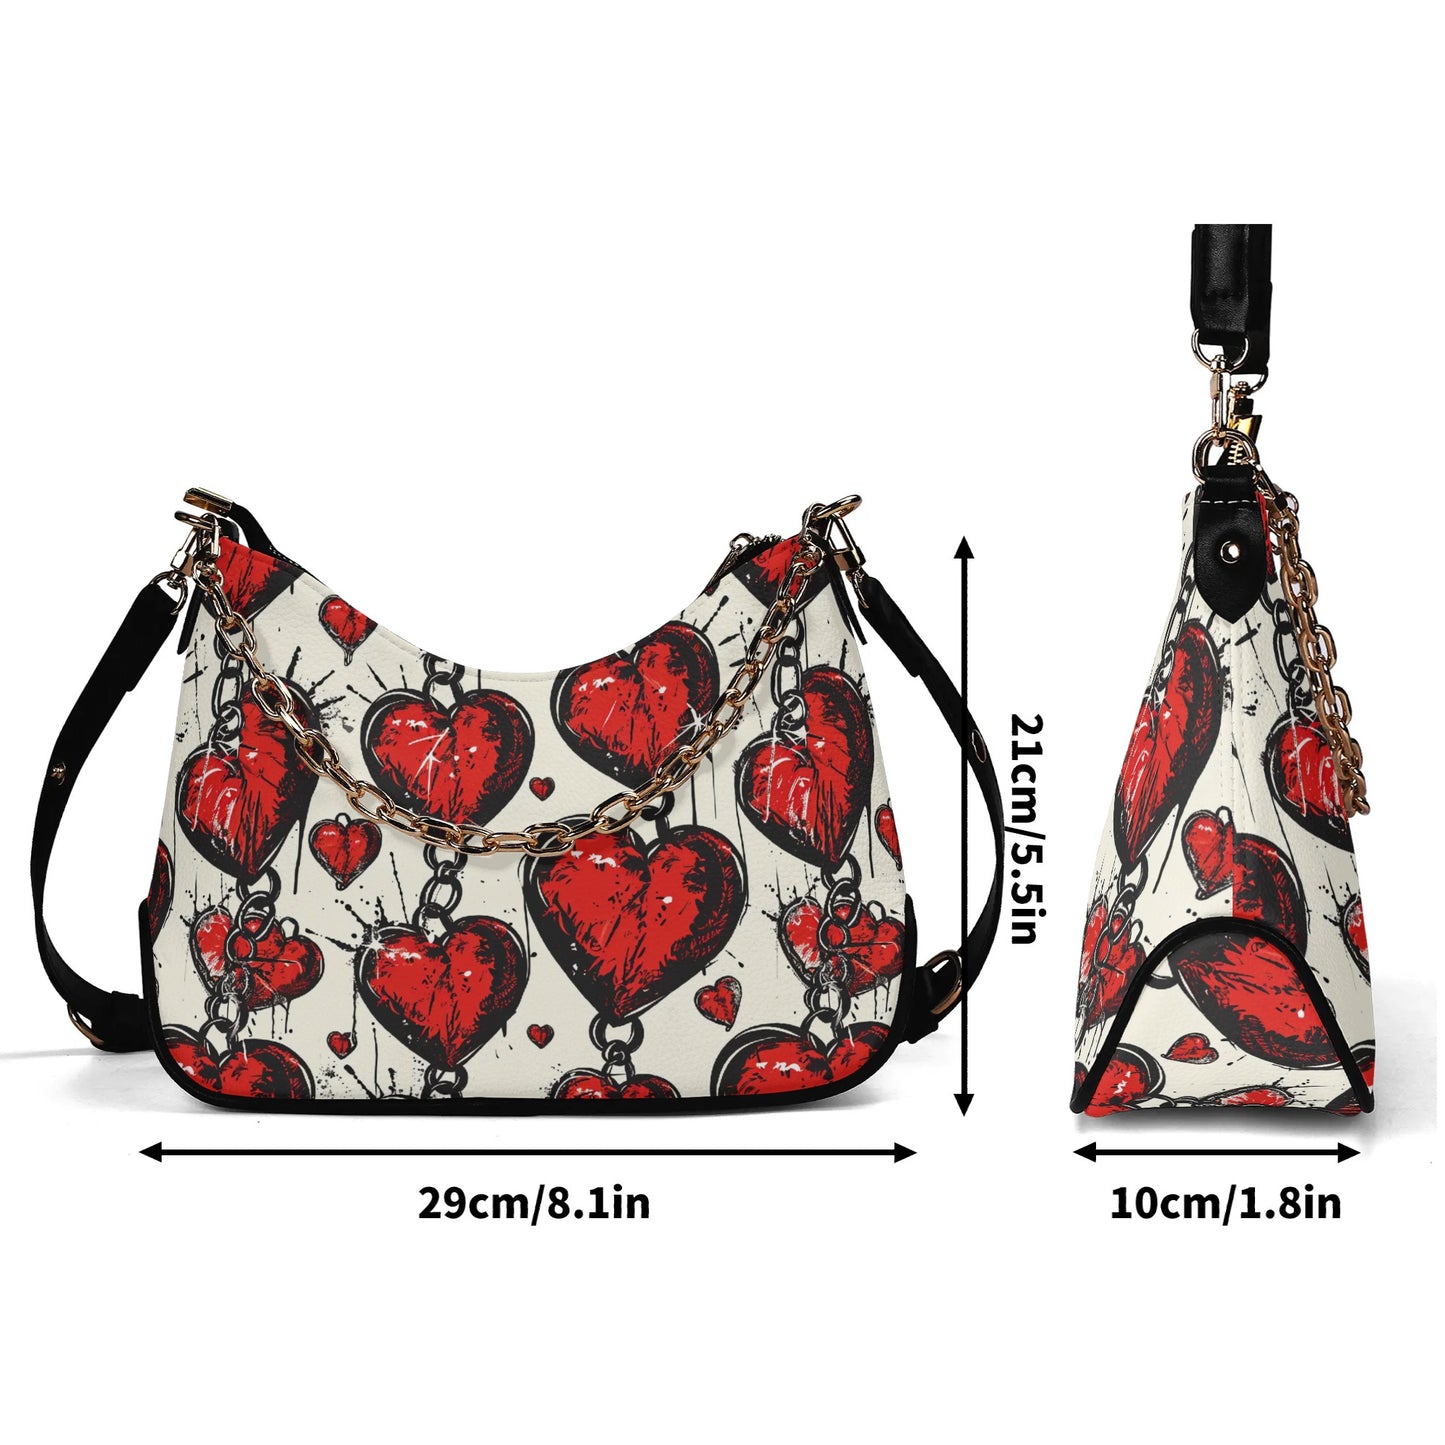 Chained Hearts Leather Hand Bag With Chain